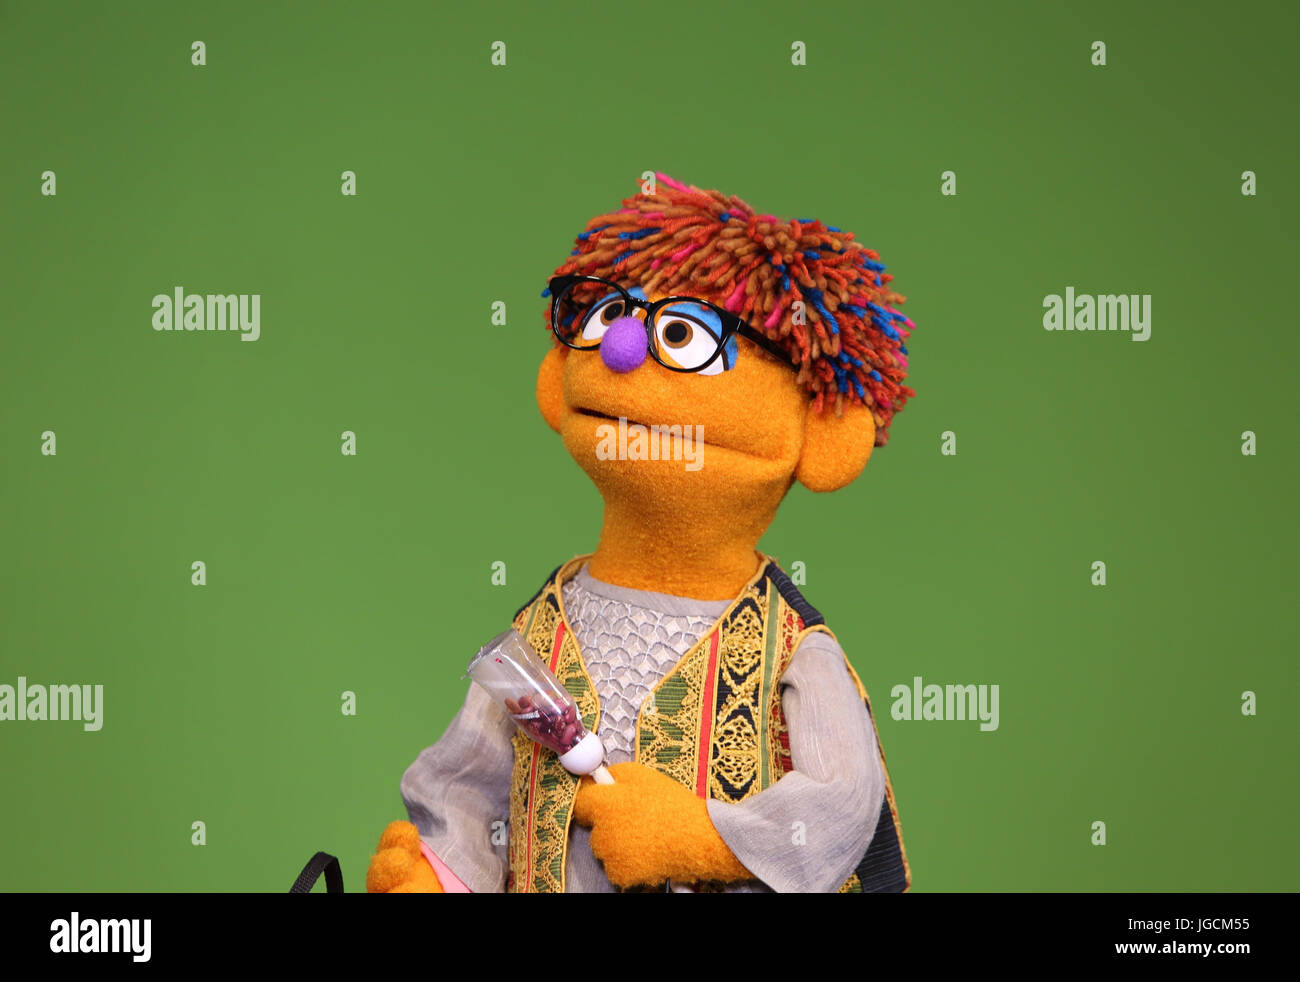 Kabul, Afghanistan. 2nd July, 2017. HANDOUT - Sirak, the new boy in the Afghani Sesame Street, photographed at his first appearance in the show 'Bache Simsim', the Afghani name of the Sesame Street, in Kabul, Afghanistan, 2 July 2017. Next to the confident character Sari, Sirak is the second local figure in the children's TV show in Afghanistan. Sirak is the small brother of Sari. Photo: Lapis Sesame Workshop/dpa/Alamy Live News Stock Photo